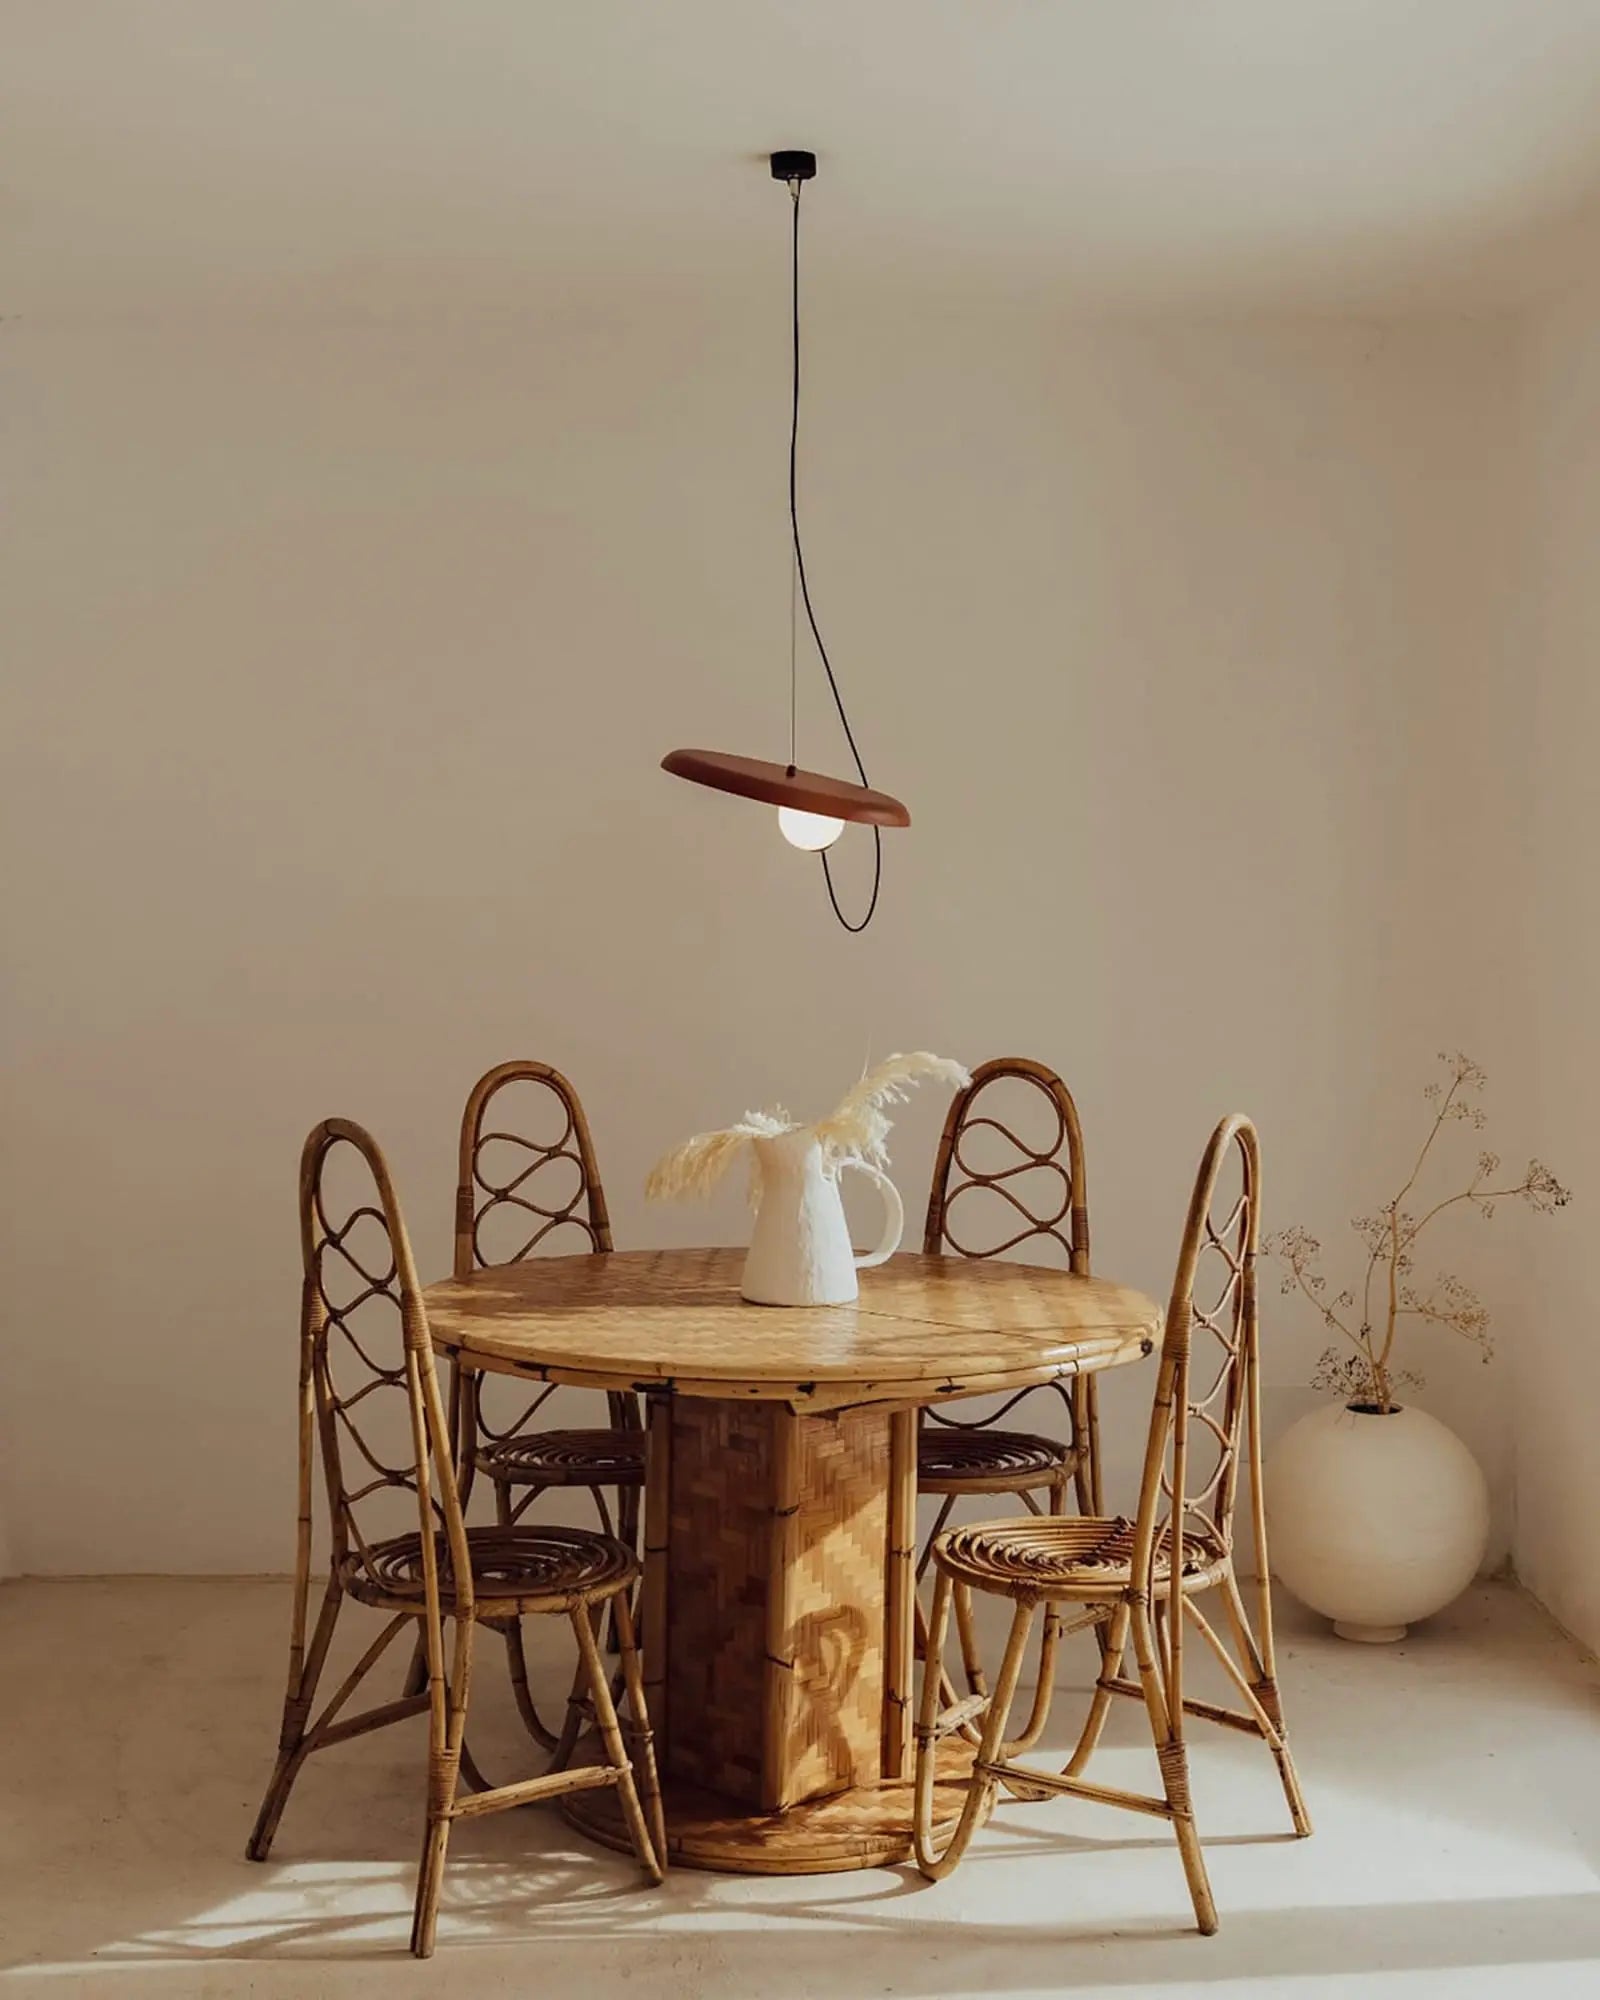 Wire pendant light above a round dining table